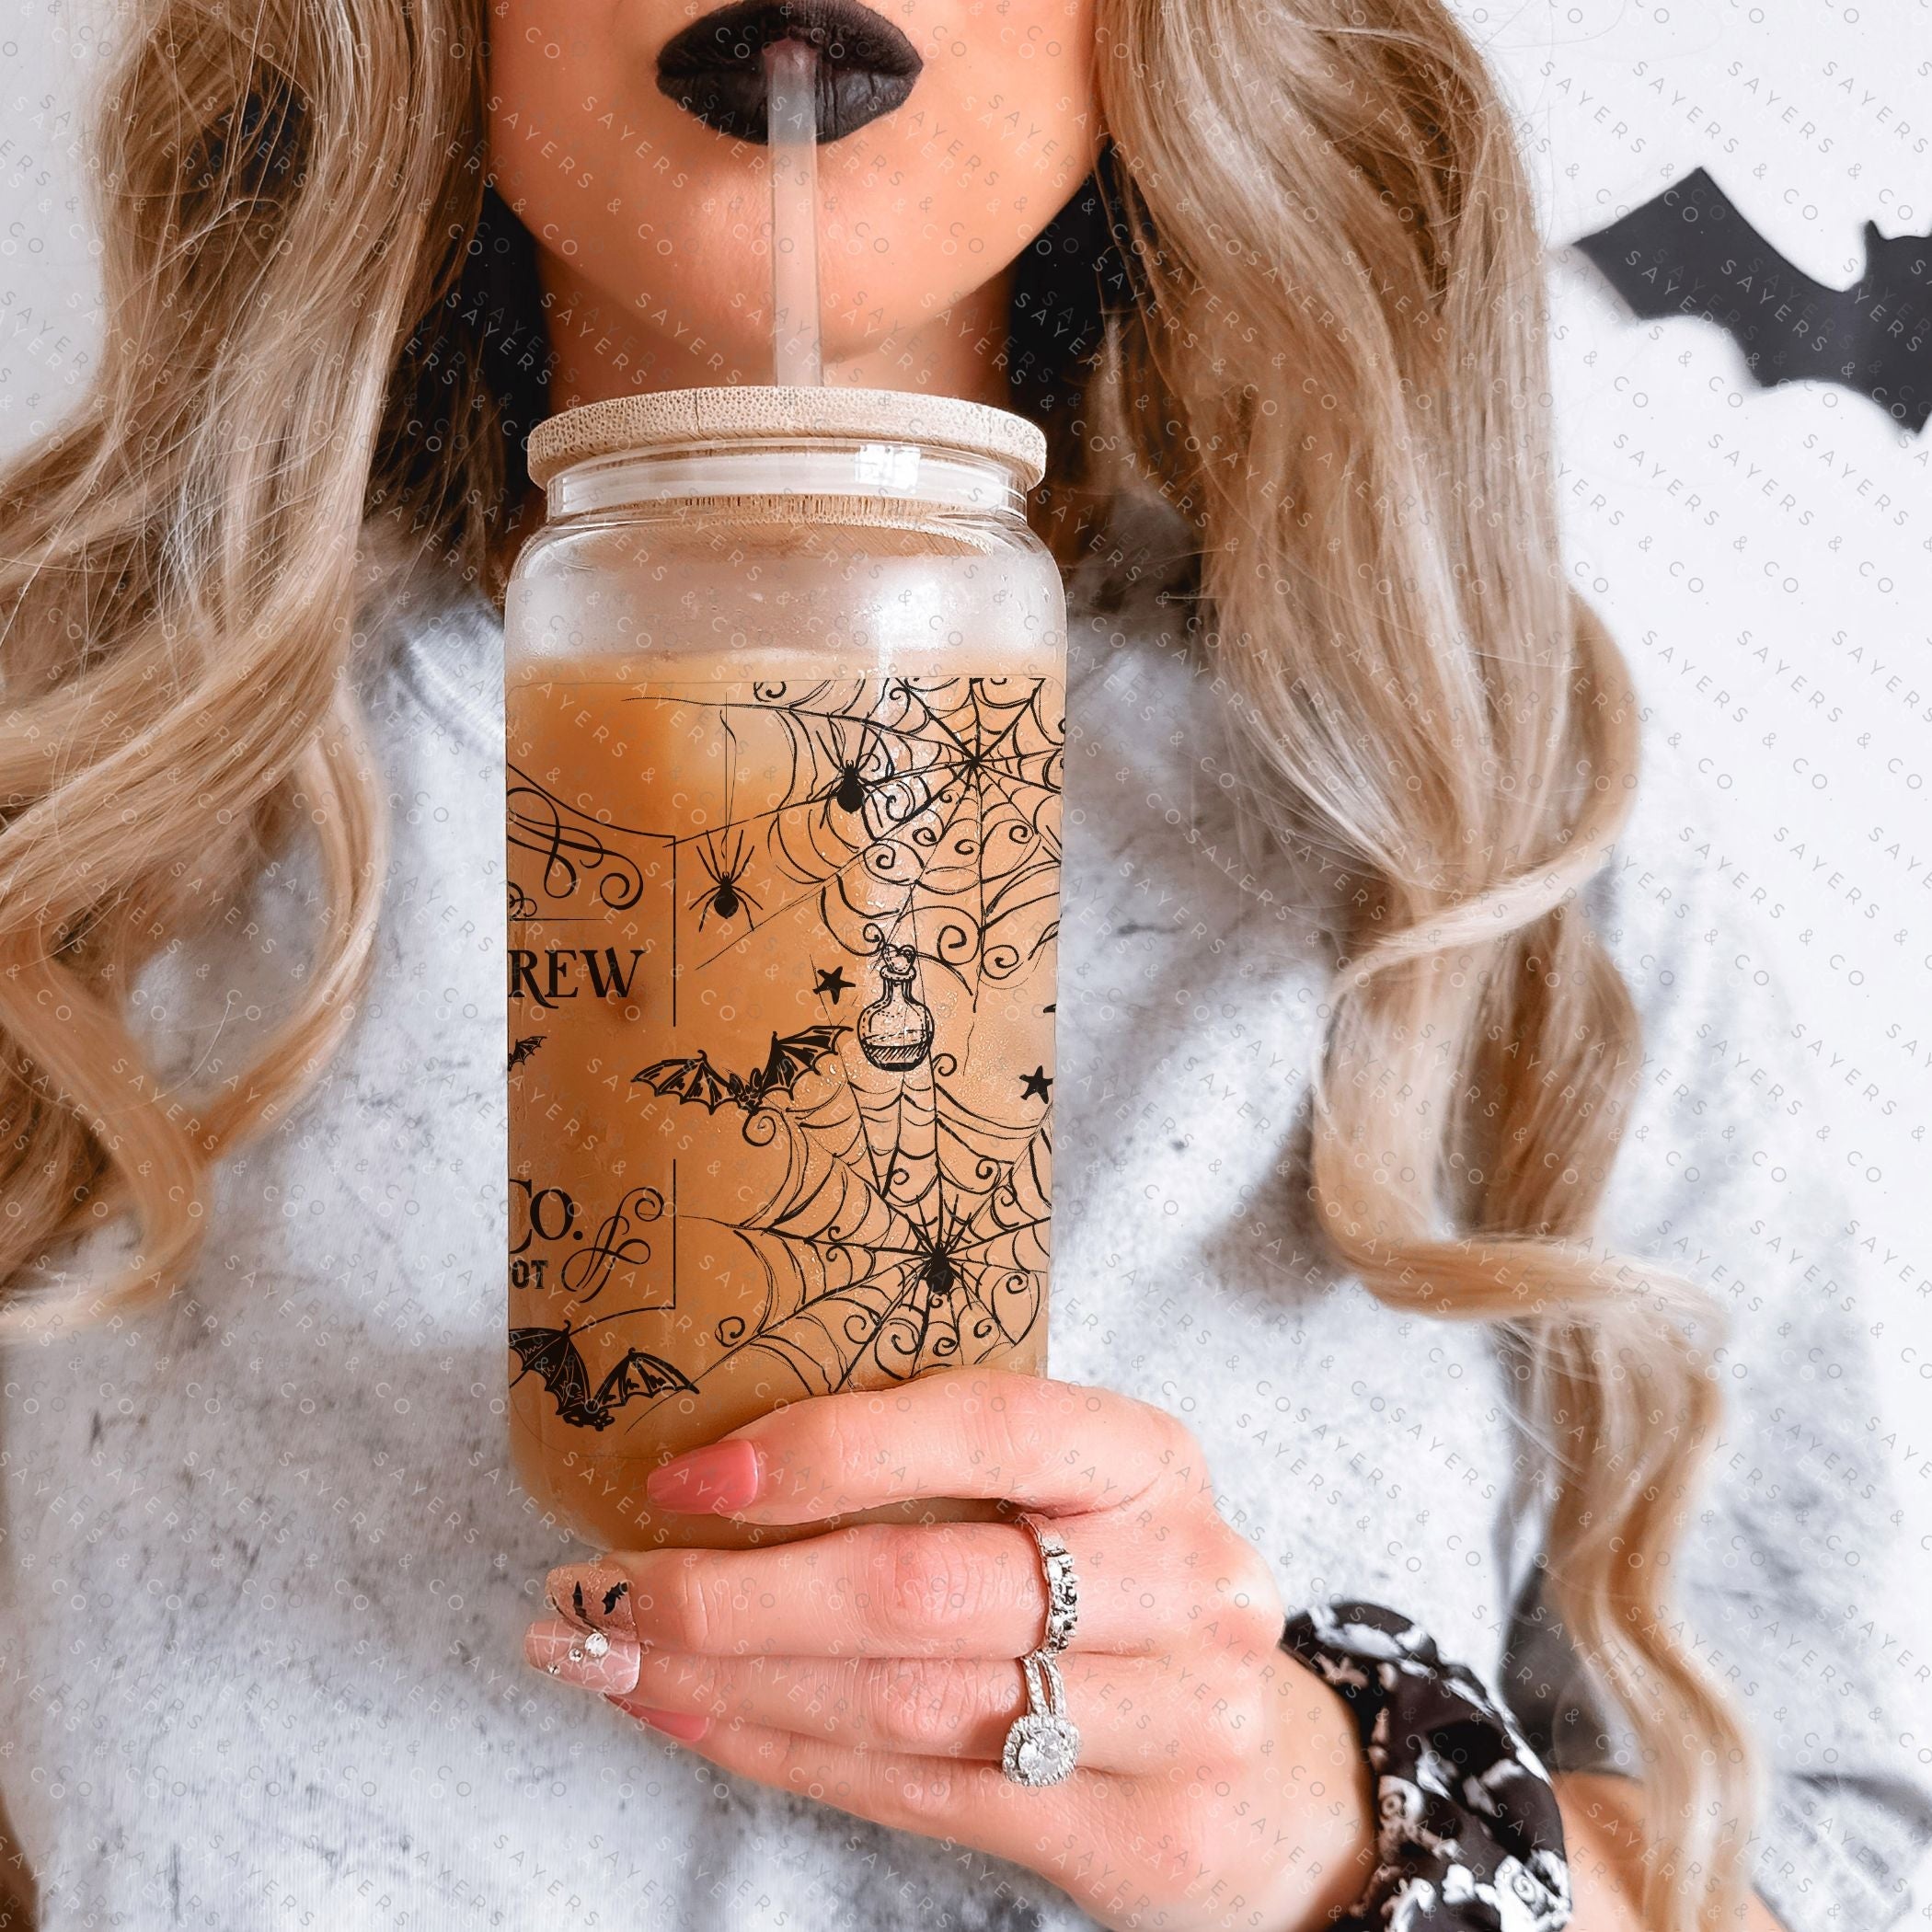 16oz Witches Brew Coffee Co Iced Coffee Glass Can, Fall Tumbler, Gift For Her, Halloween Mug, Potion Iced Coffee Can with Bamboo Lid & Straw | Sayers & Co.